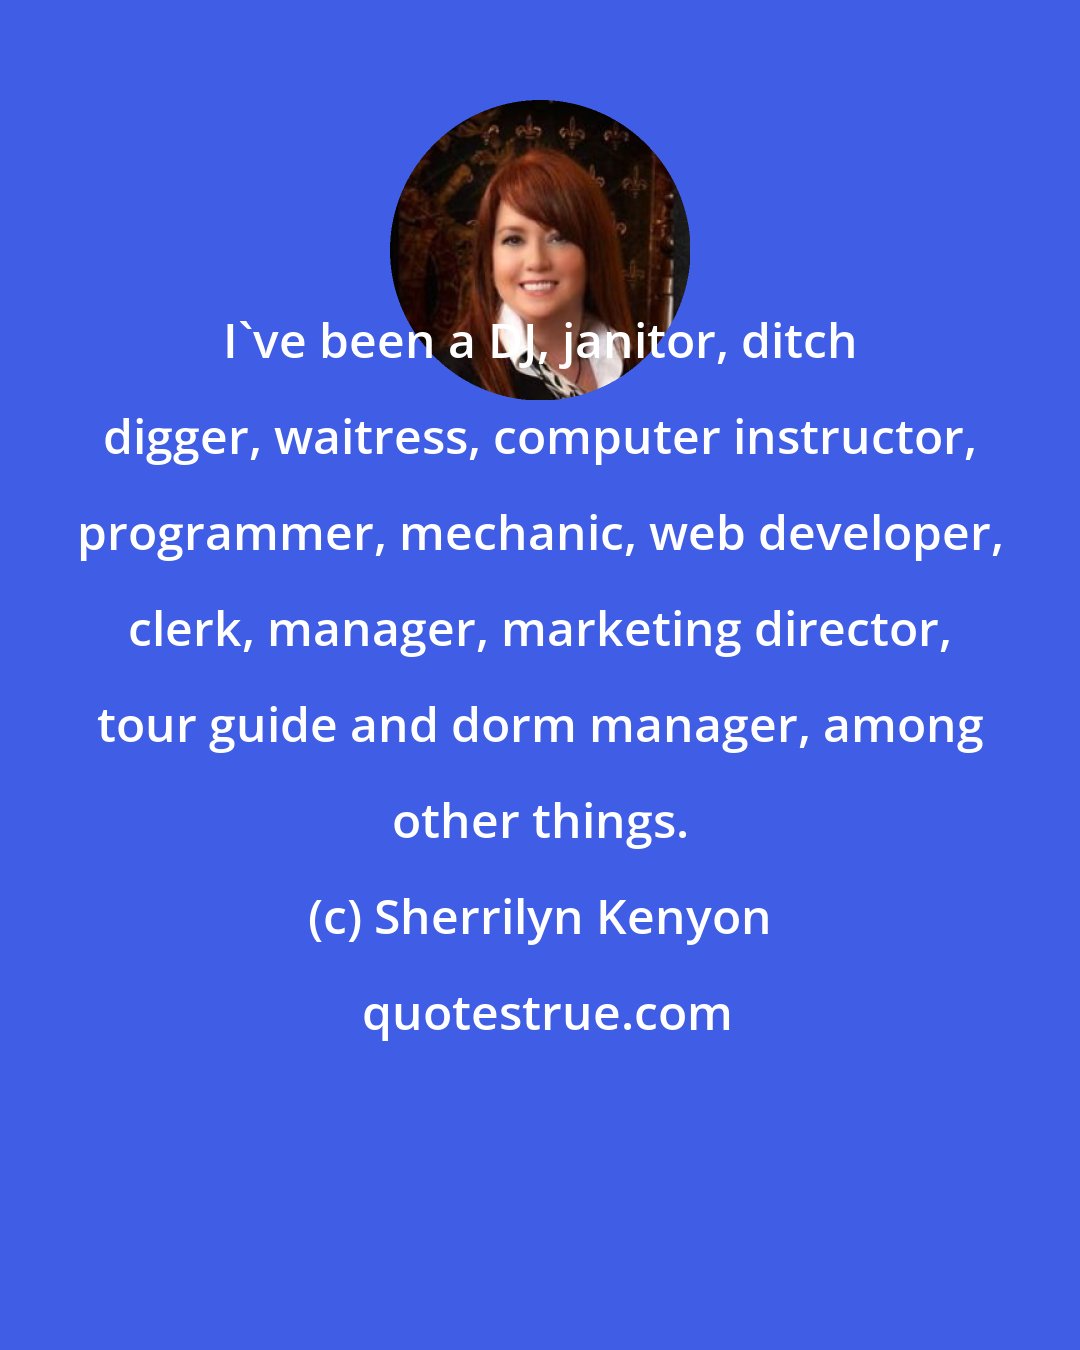 Sherrilyn Kenyon: I've been a DJ, janitor, ditch digger, waitress, computer instructor, programmer, mechanic, web developer, clerk, manager, marketing director, tour guide and dorm manager, among other things.